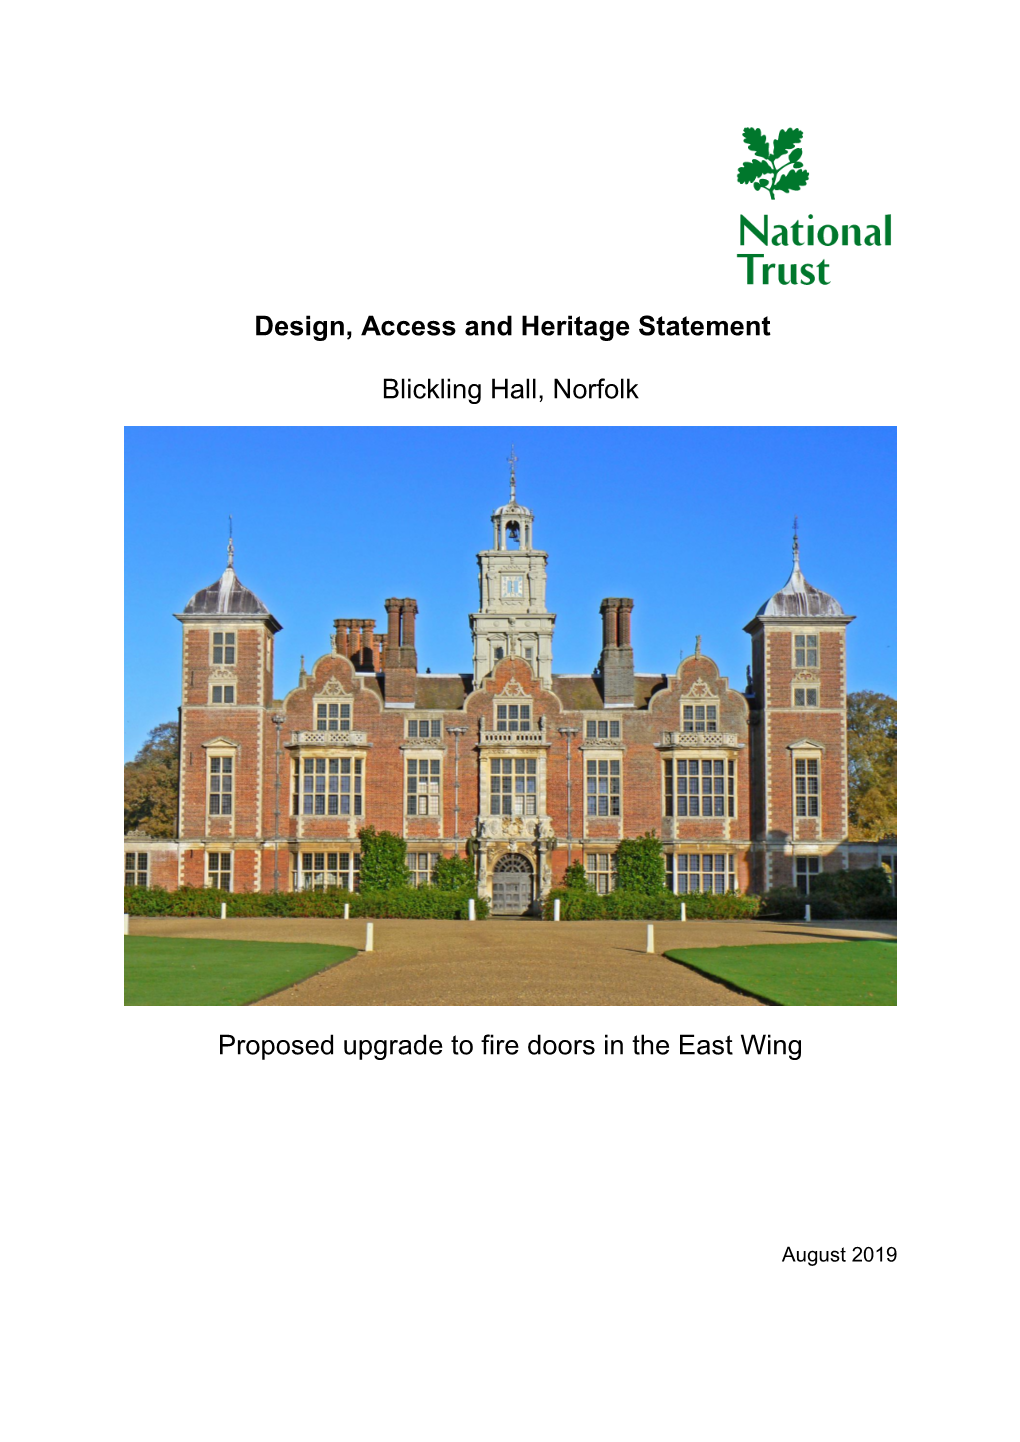 Design, Access and Heritage Statement Blickling Hall, Norfolk